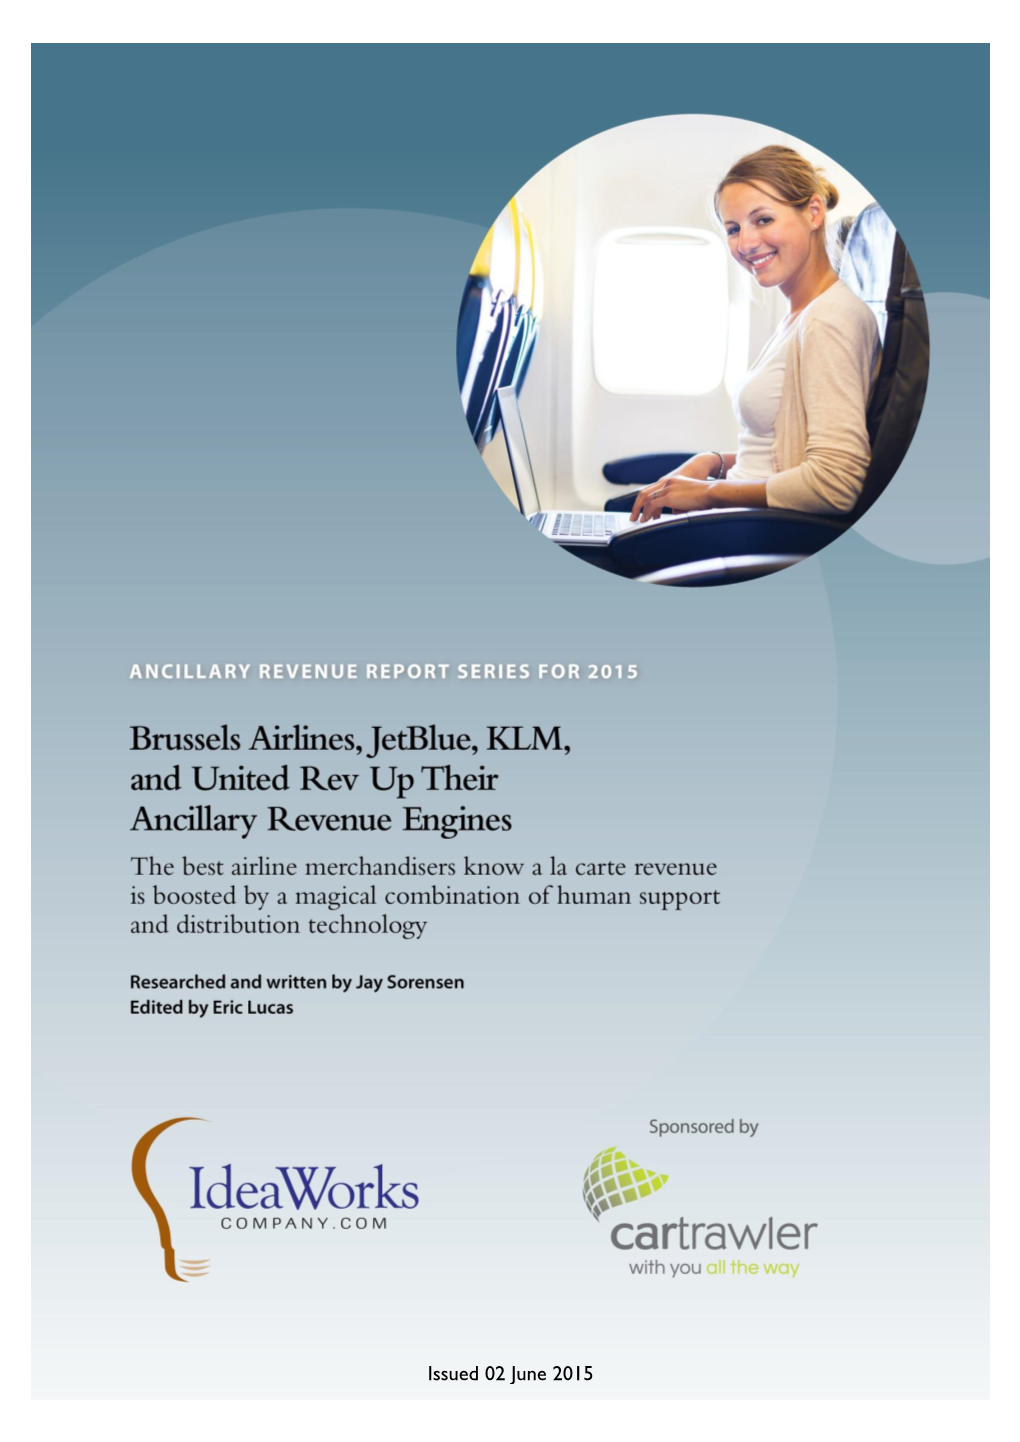 Brussels Airlines, Jetblue, KLM, and United Rev up Their Ancillary Revenue Engines